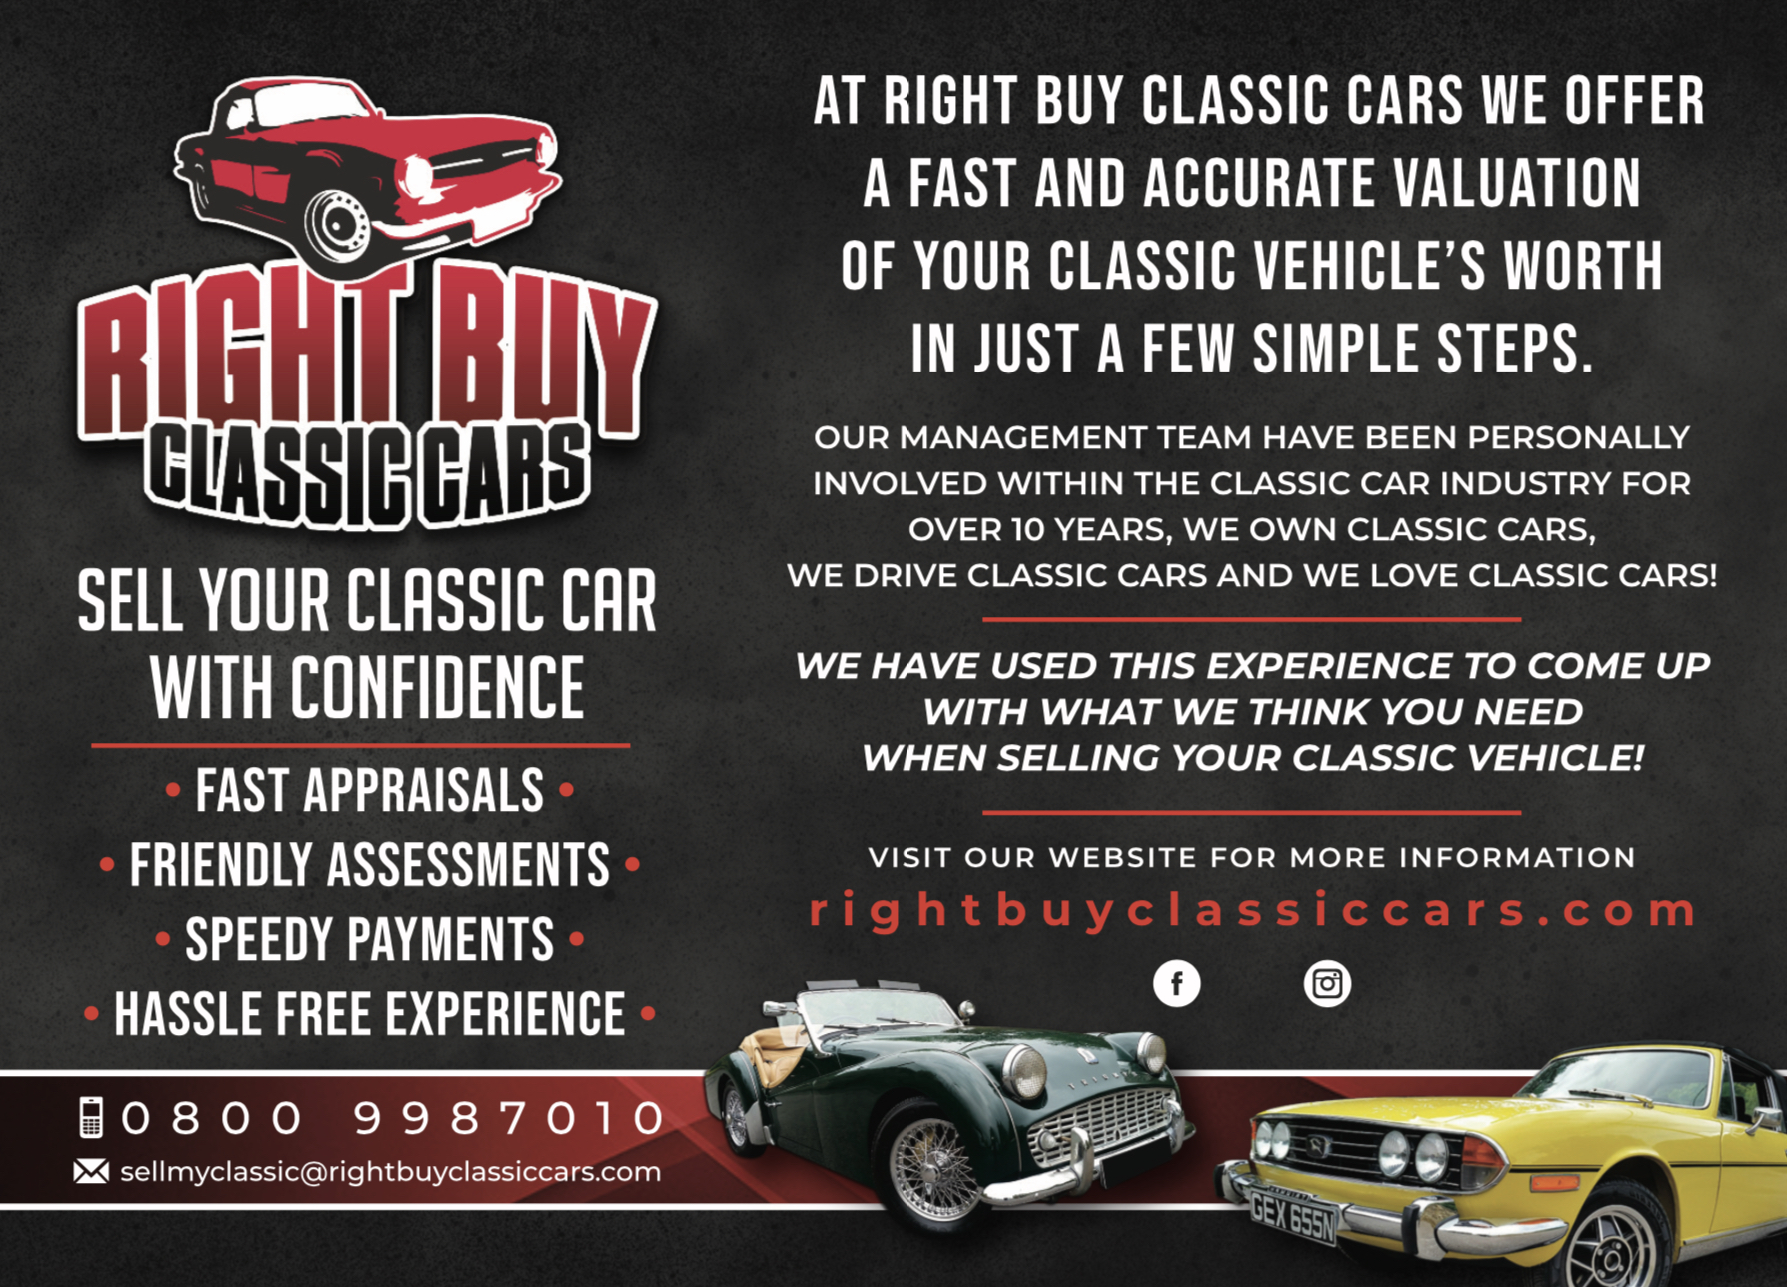 Right Buy Classic Cars - Valuation appraisal buyer